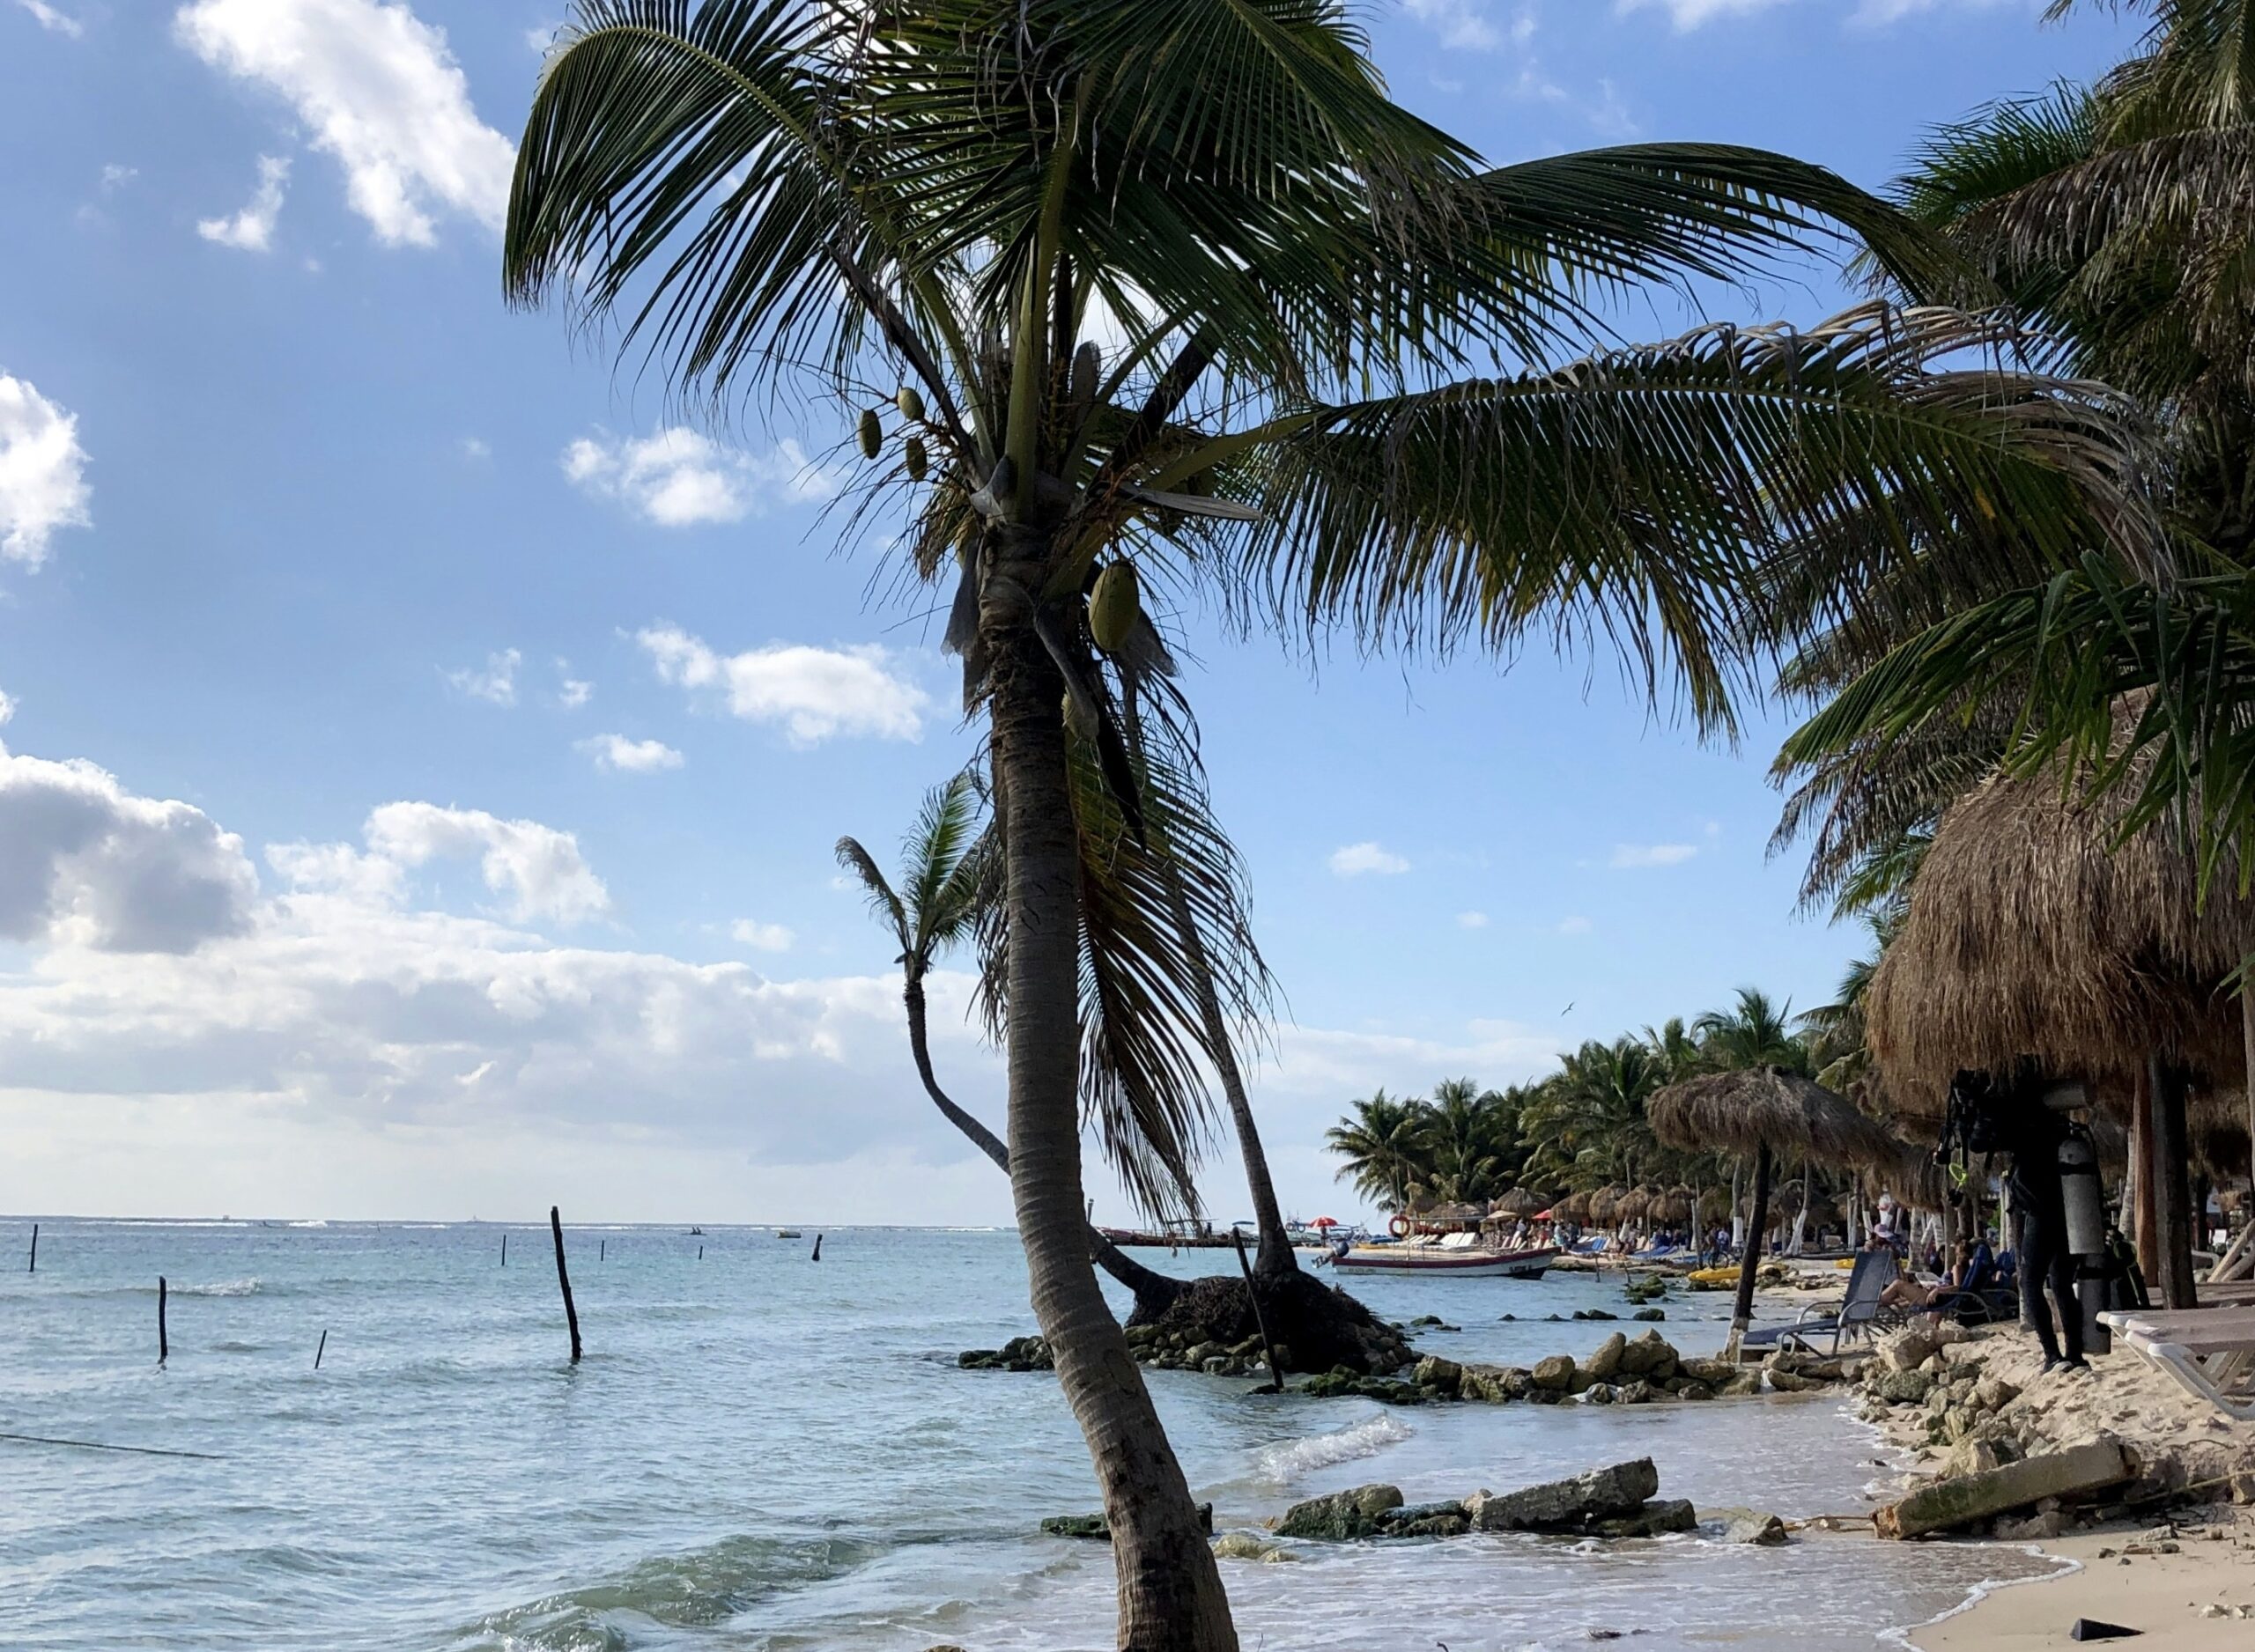 There is plenty for cruisers and travelers to do around the Costa Maya cruise port. 
pictured: a sandy beach and the coast of Costa Maya on a cloudy day